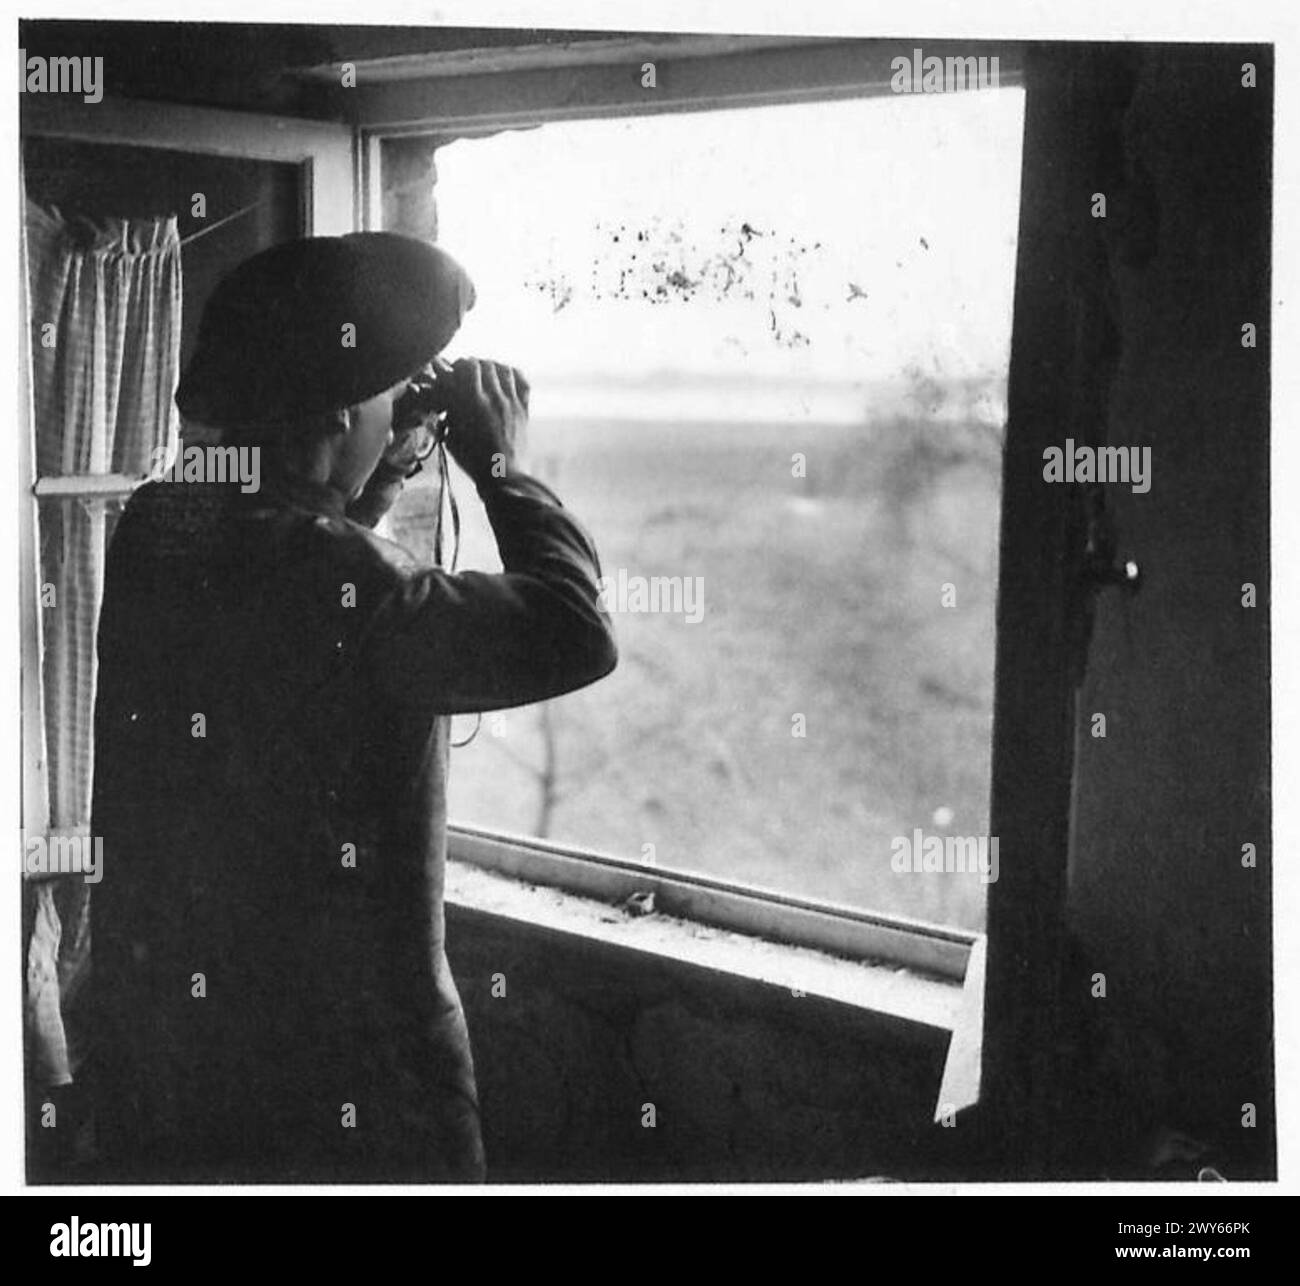 OVERLOOKING THE RHINE - Pte Loenard Webb of the SLI watches for movement on the far bank of the Rhine. The Rhine can be seen from the window. , British Army, 21st Army Group Stock Photo